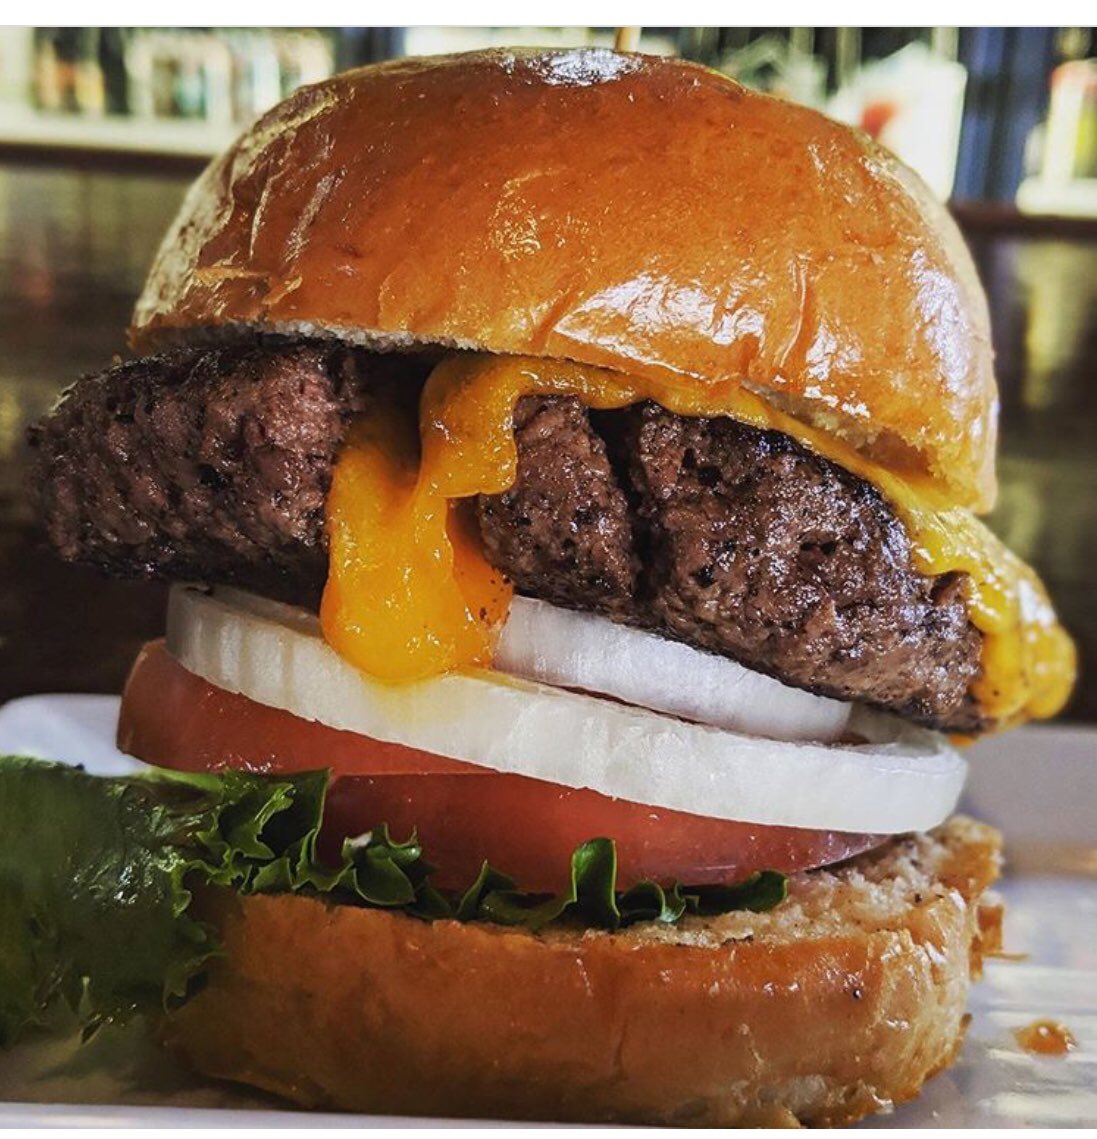 It’s Tuesday night, that means late night burger specials 😍 $5 off all burgers and 1/2 off apps! 10PM-12AM, dine in only. #CapAleRVA #RVAFood #RVA